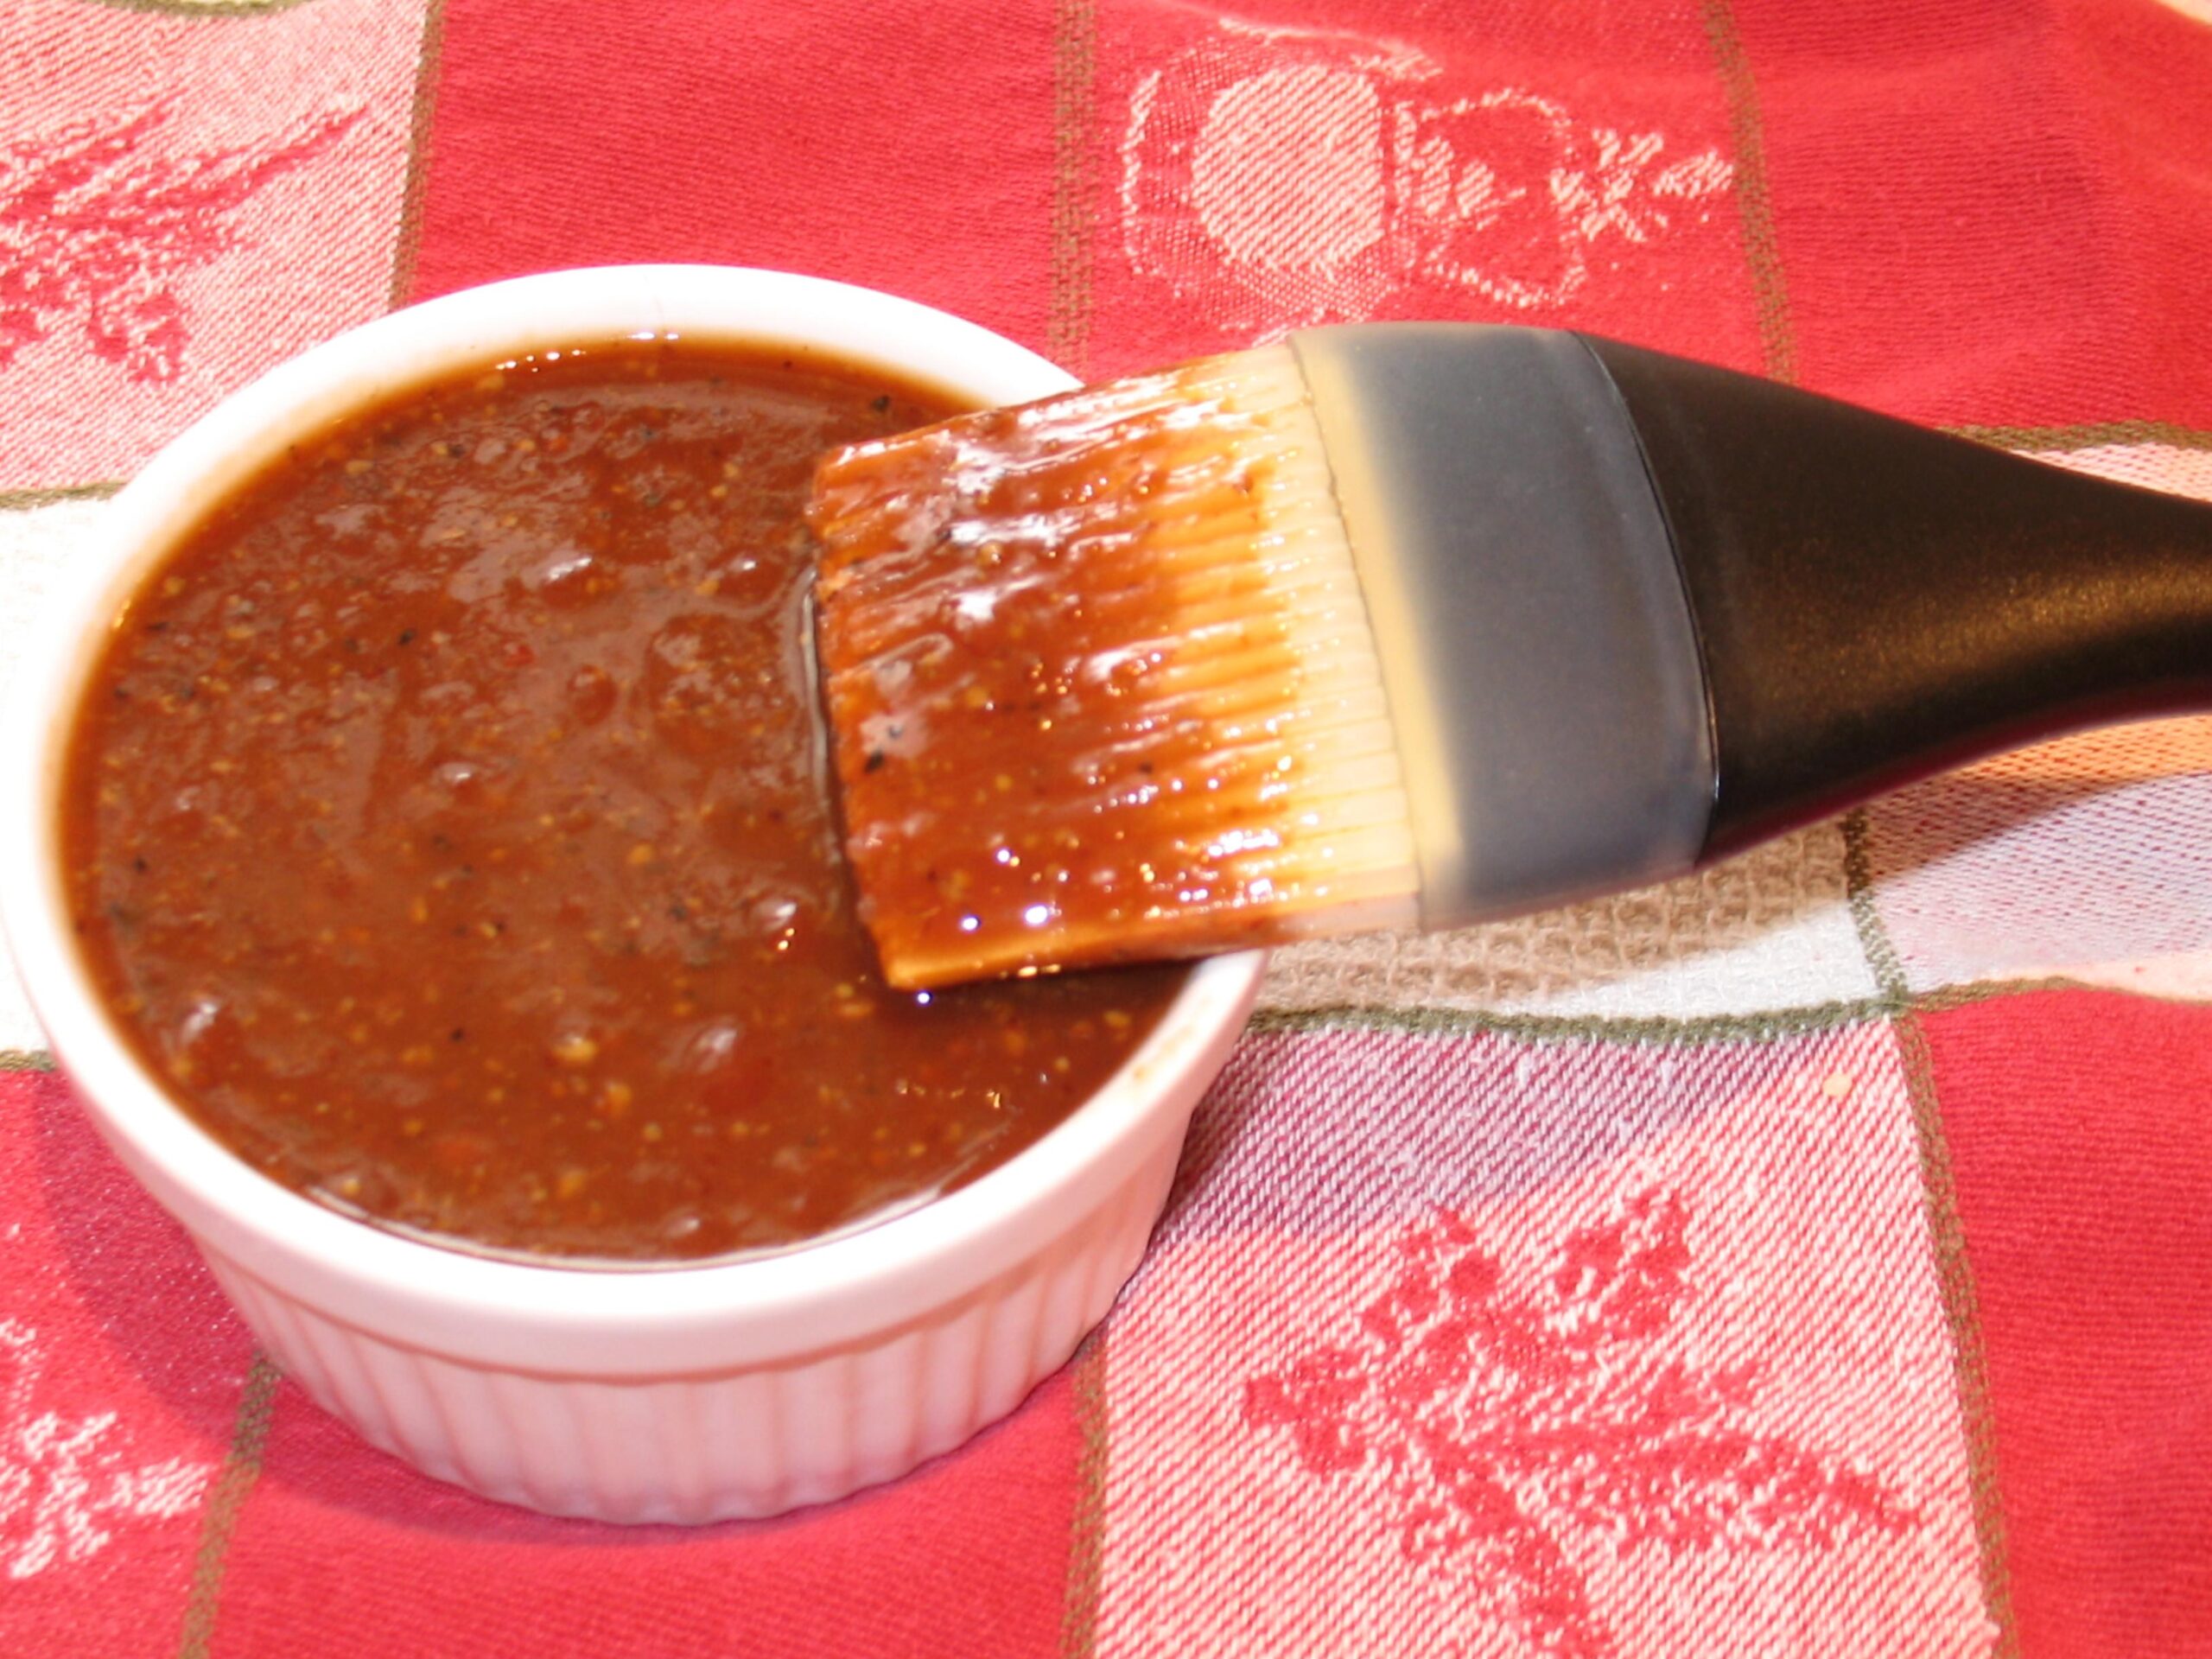  This sauce is the perfect blend of smoky and spicy.